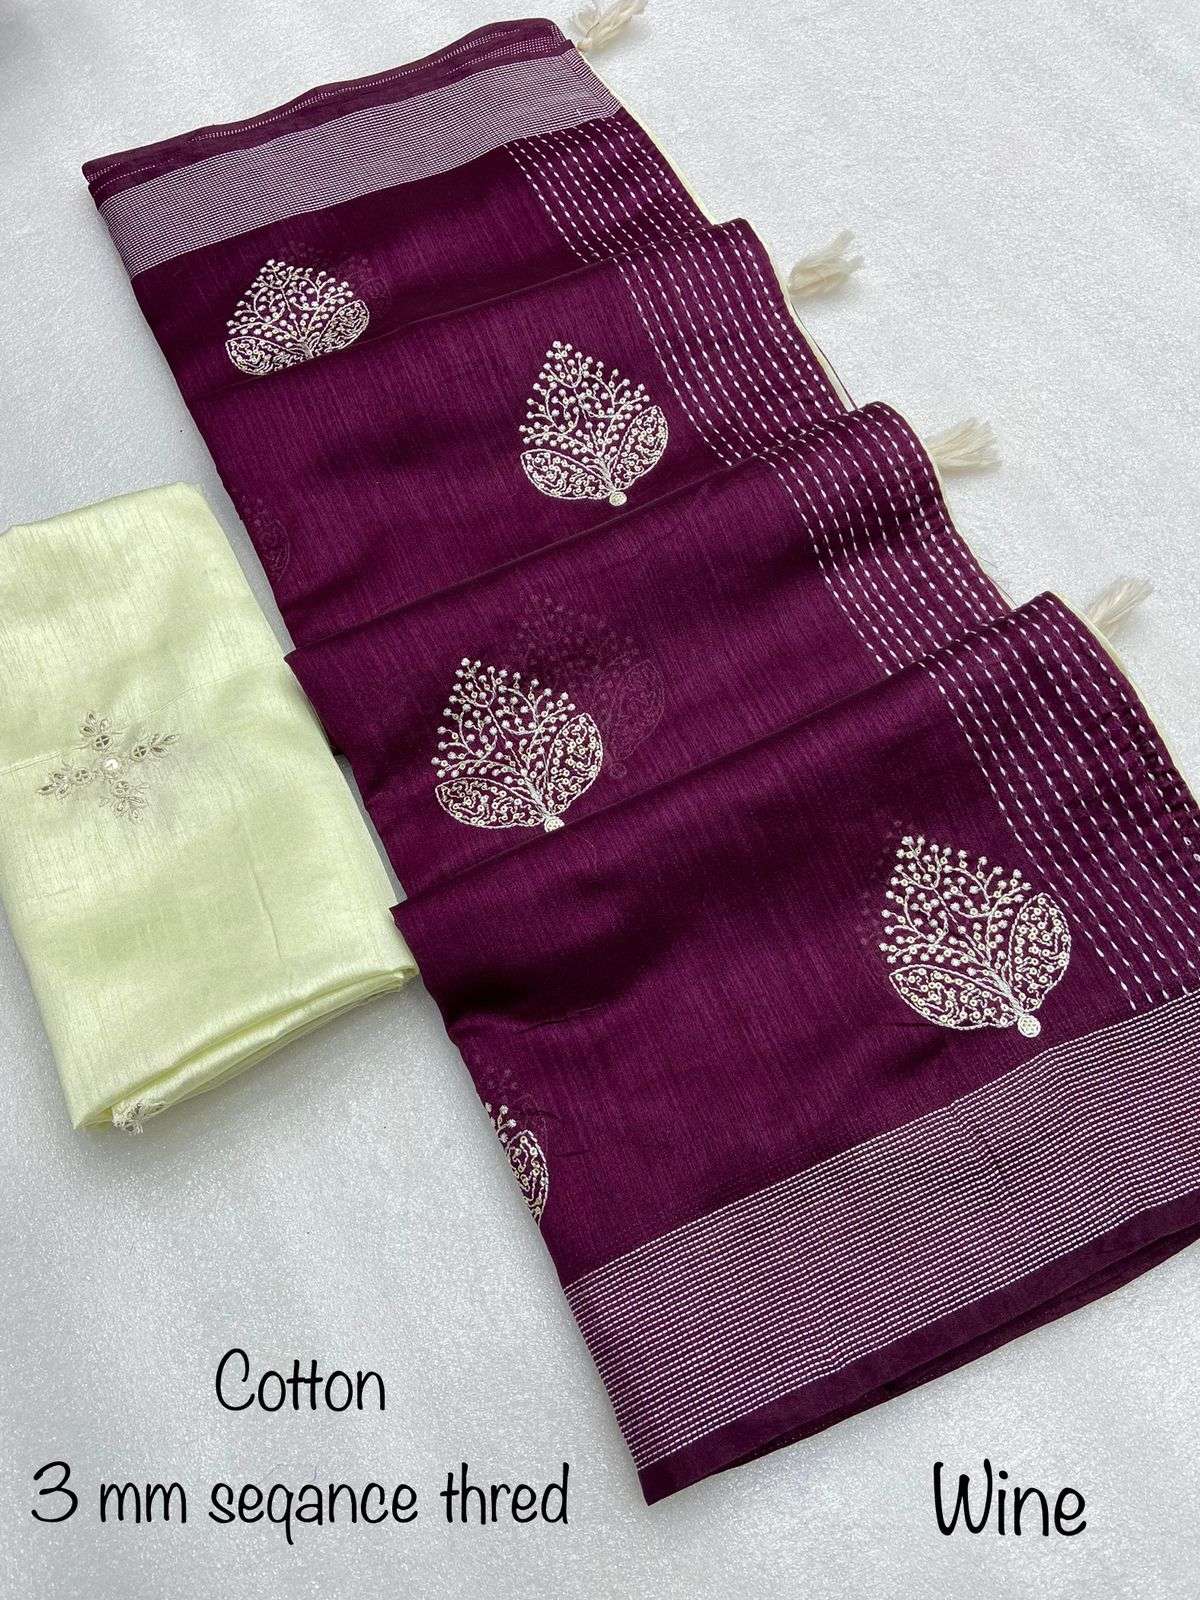 designer saree beautiful crystal cotton saree with 3 mm thread butta in whole saree with rich look phumka nd lace border blouse fully work blouse unstitched 6 ultimate colour available saree 